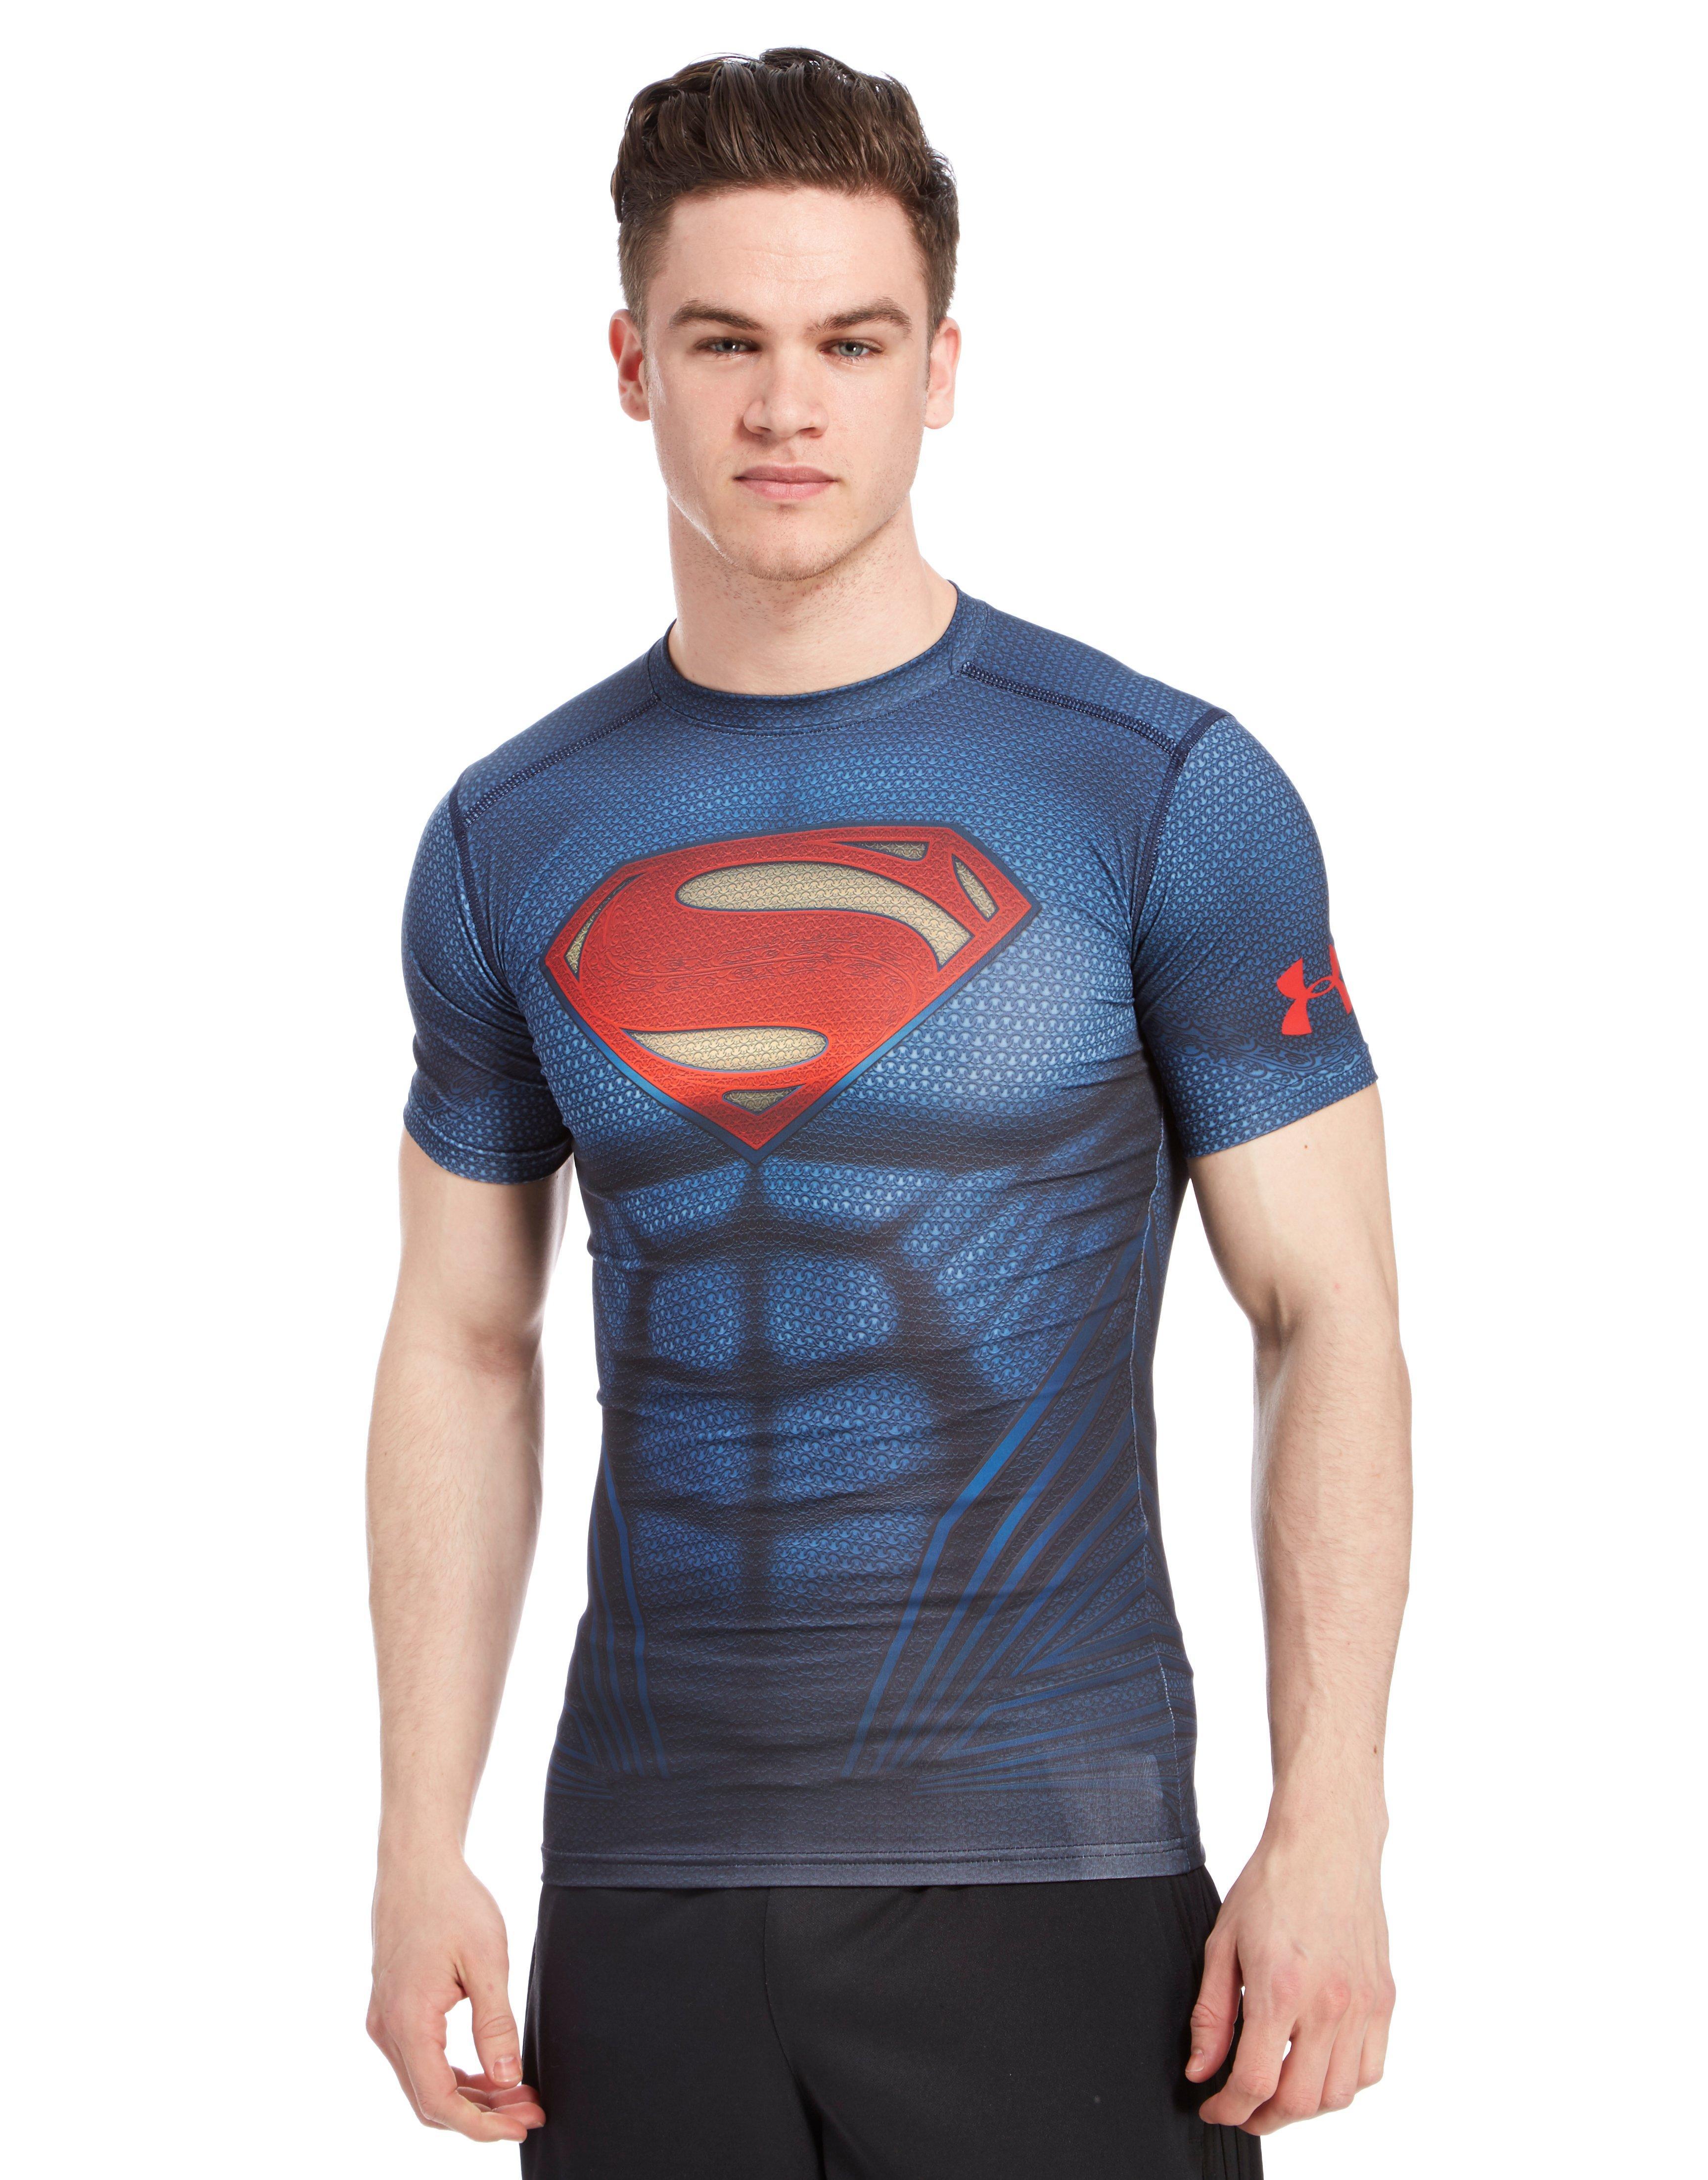 under armour superhero t shirts Cheaper Than Retail Price> Buy Clothing,  Accessories and lifestyle products for women & men -